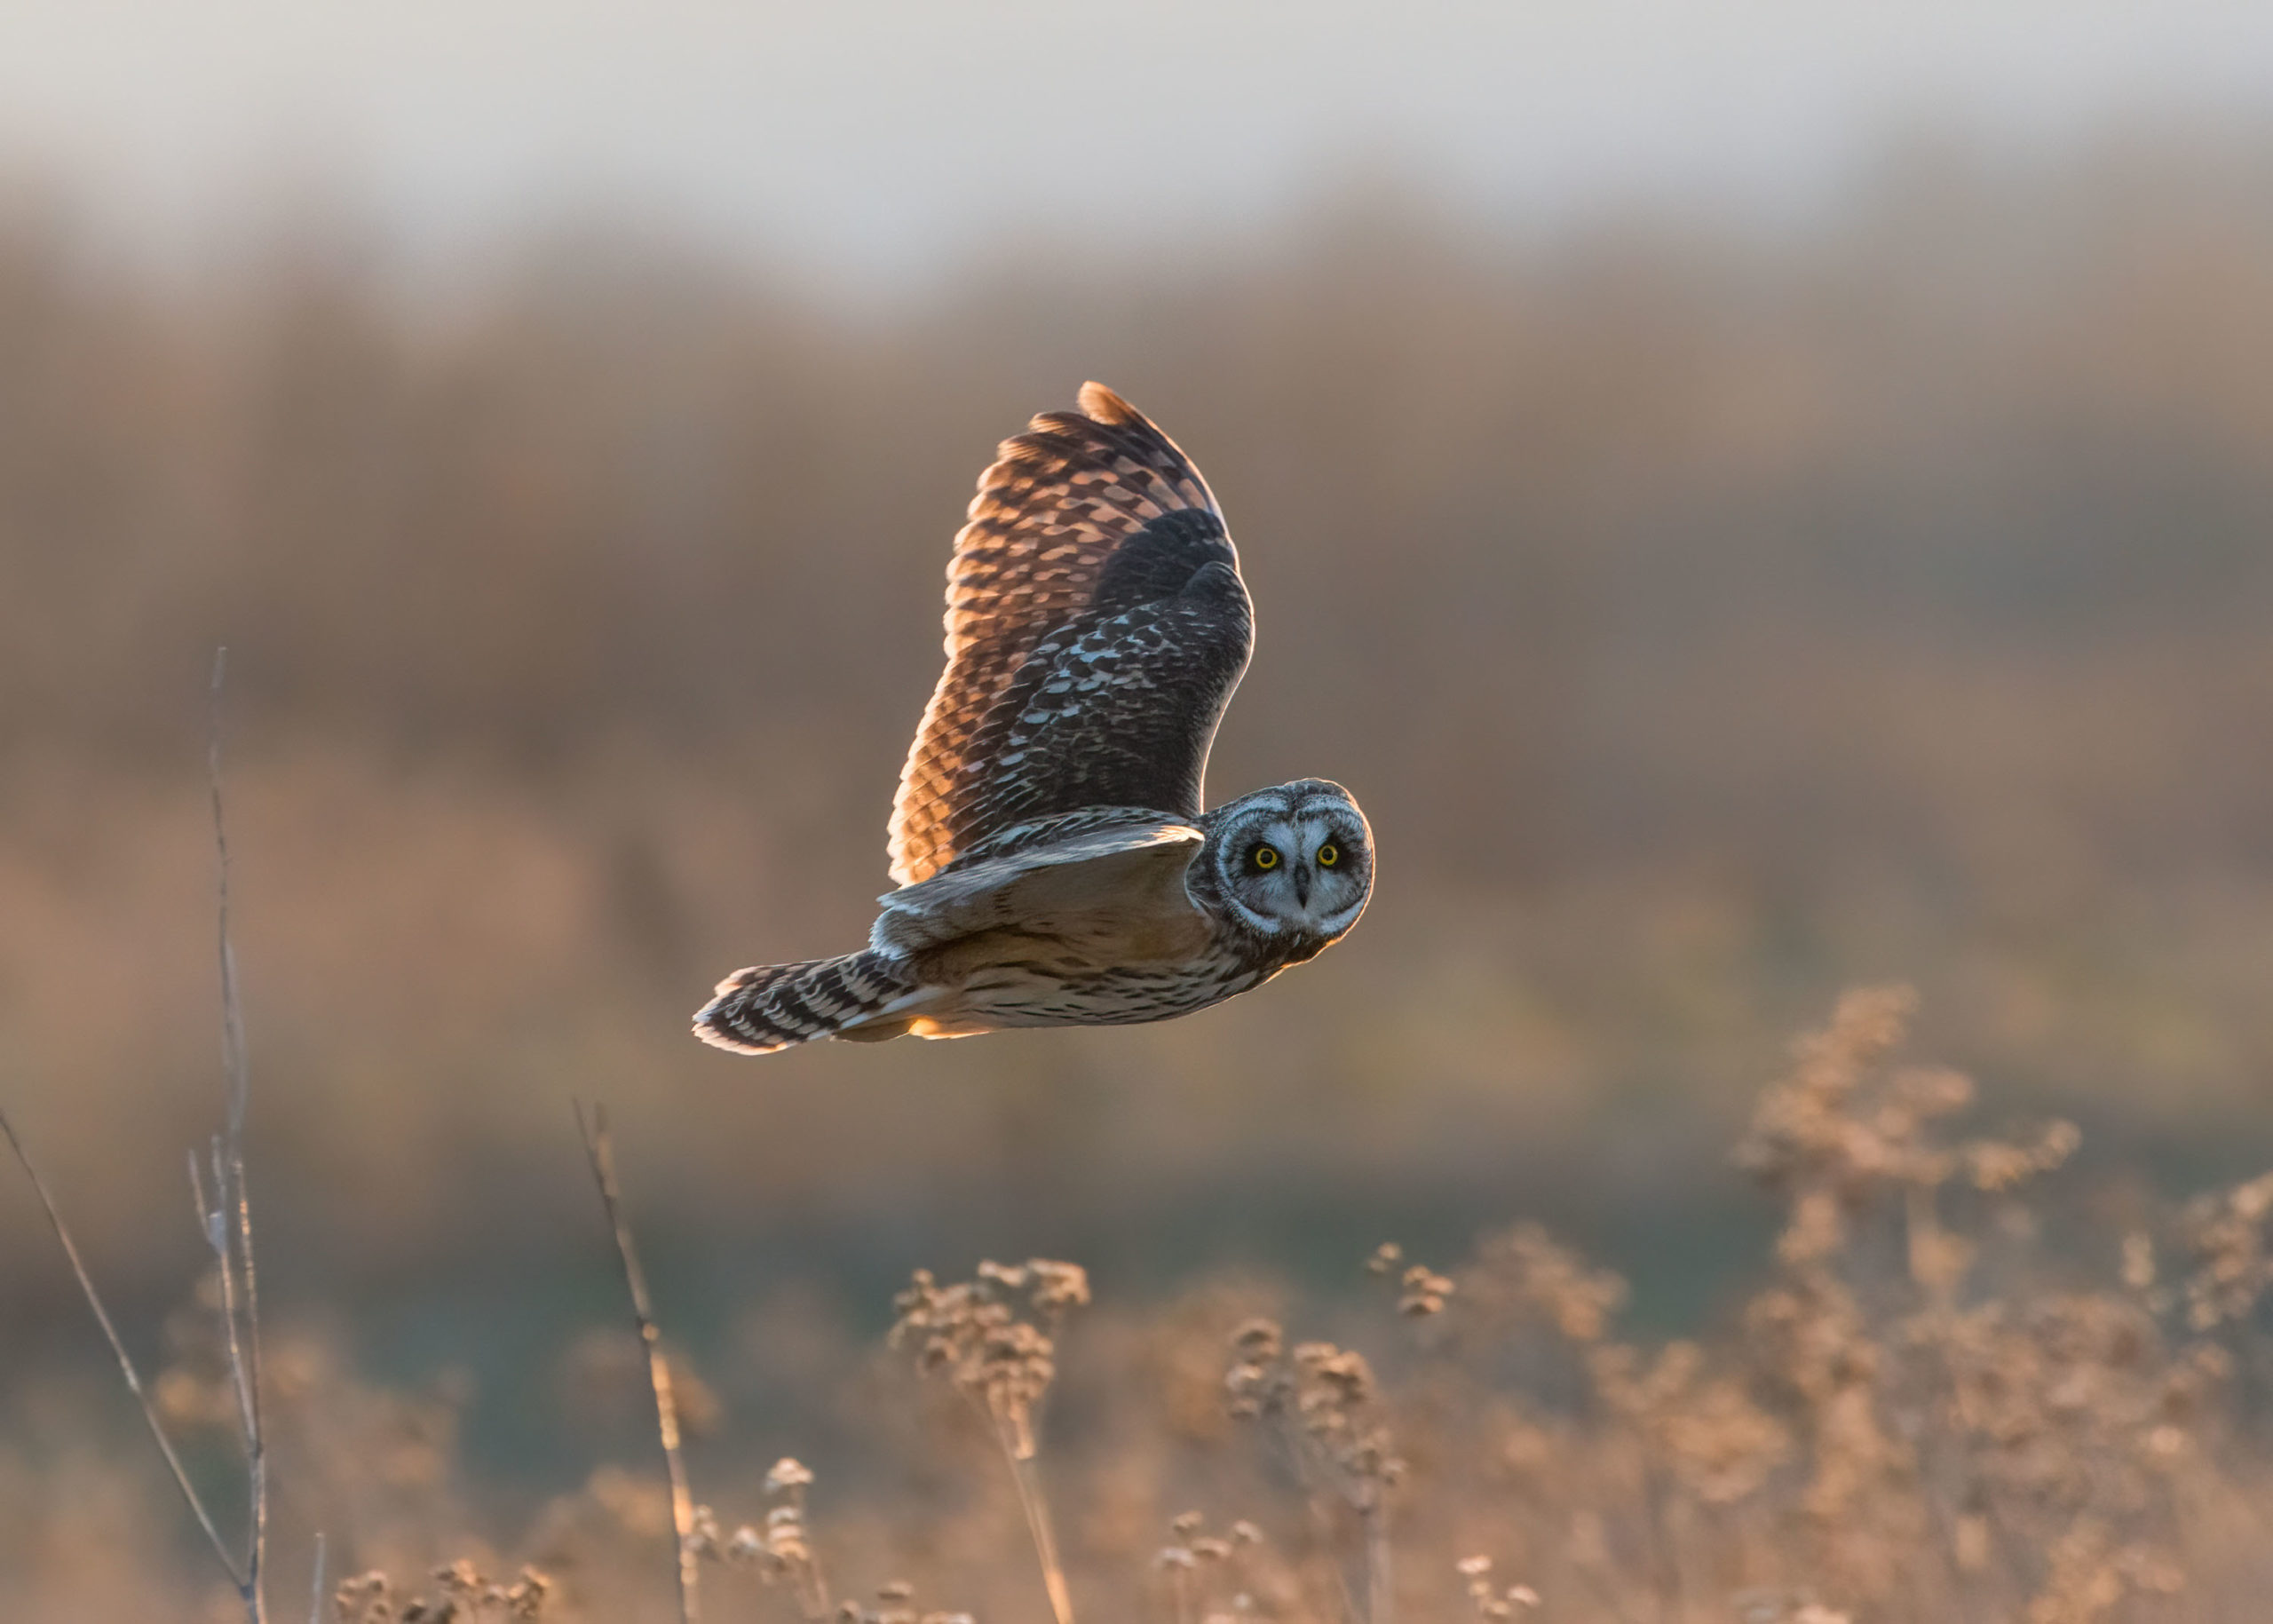 Short eared owl in flight looks directly into the camera